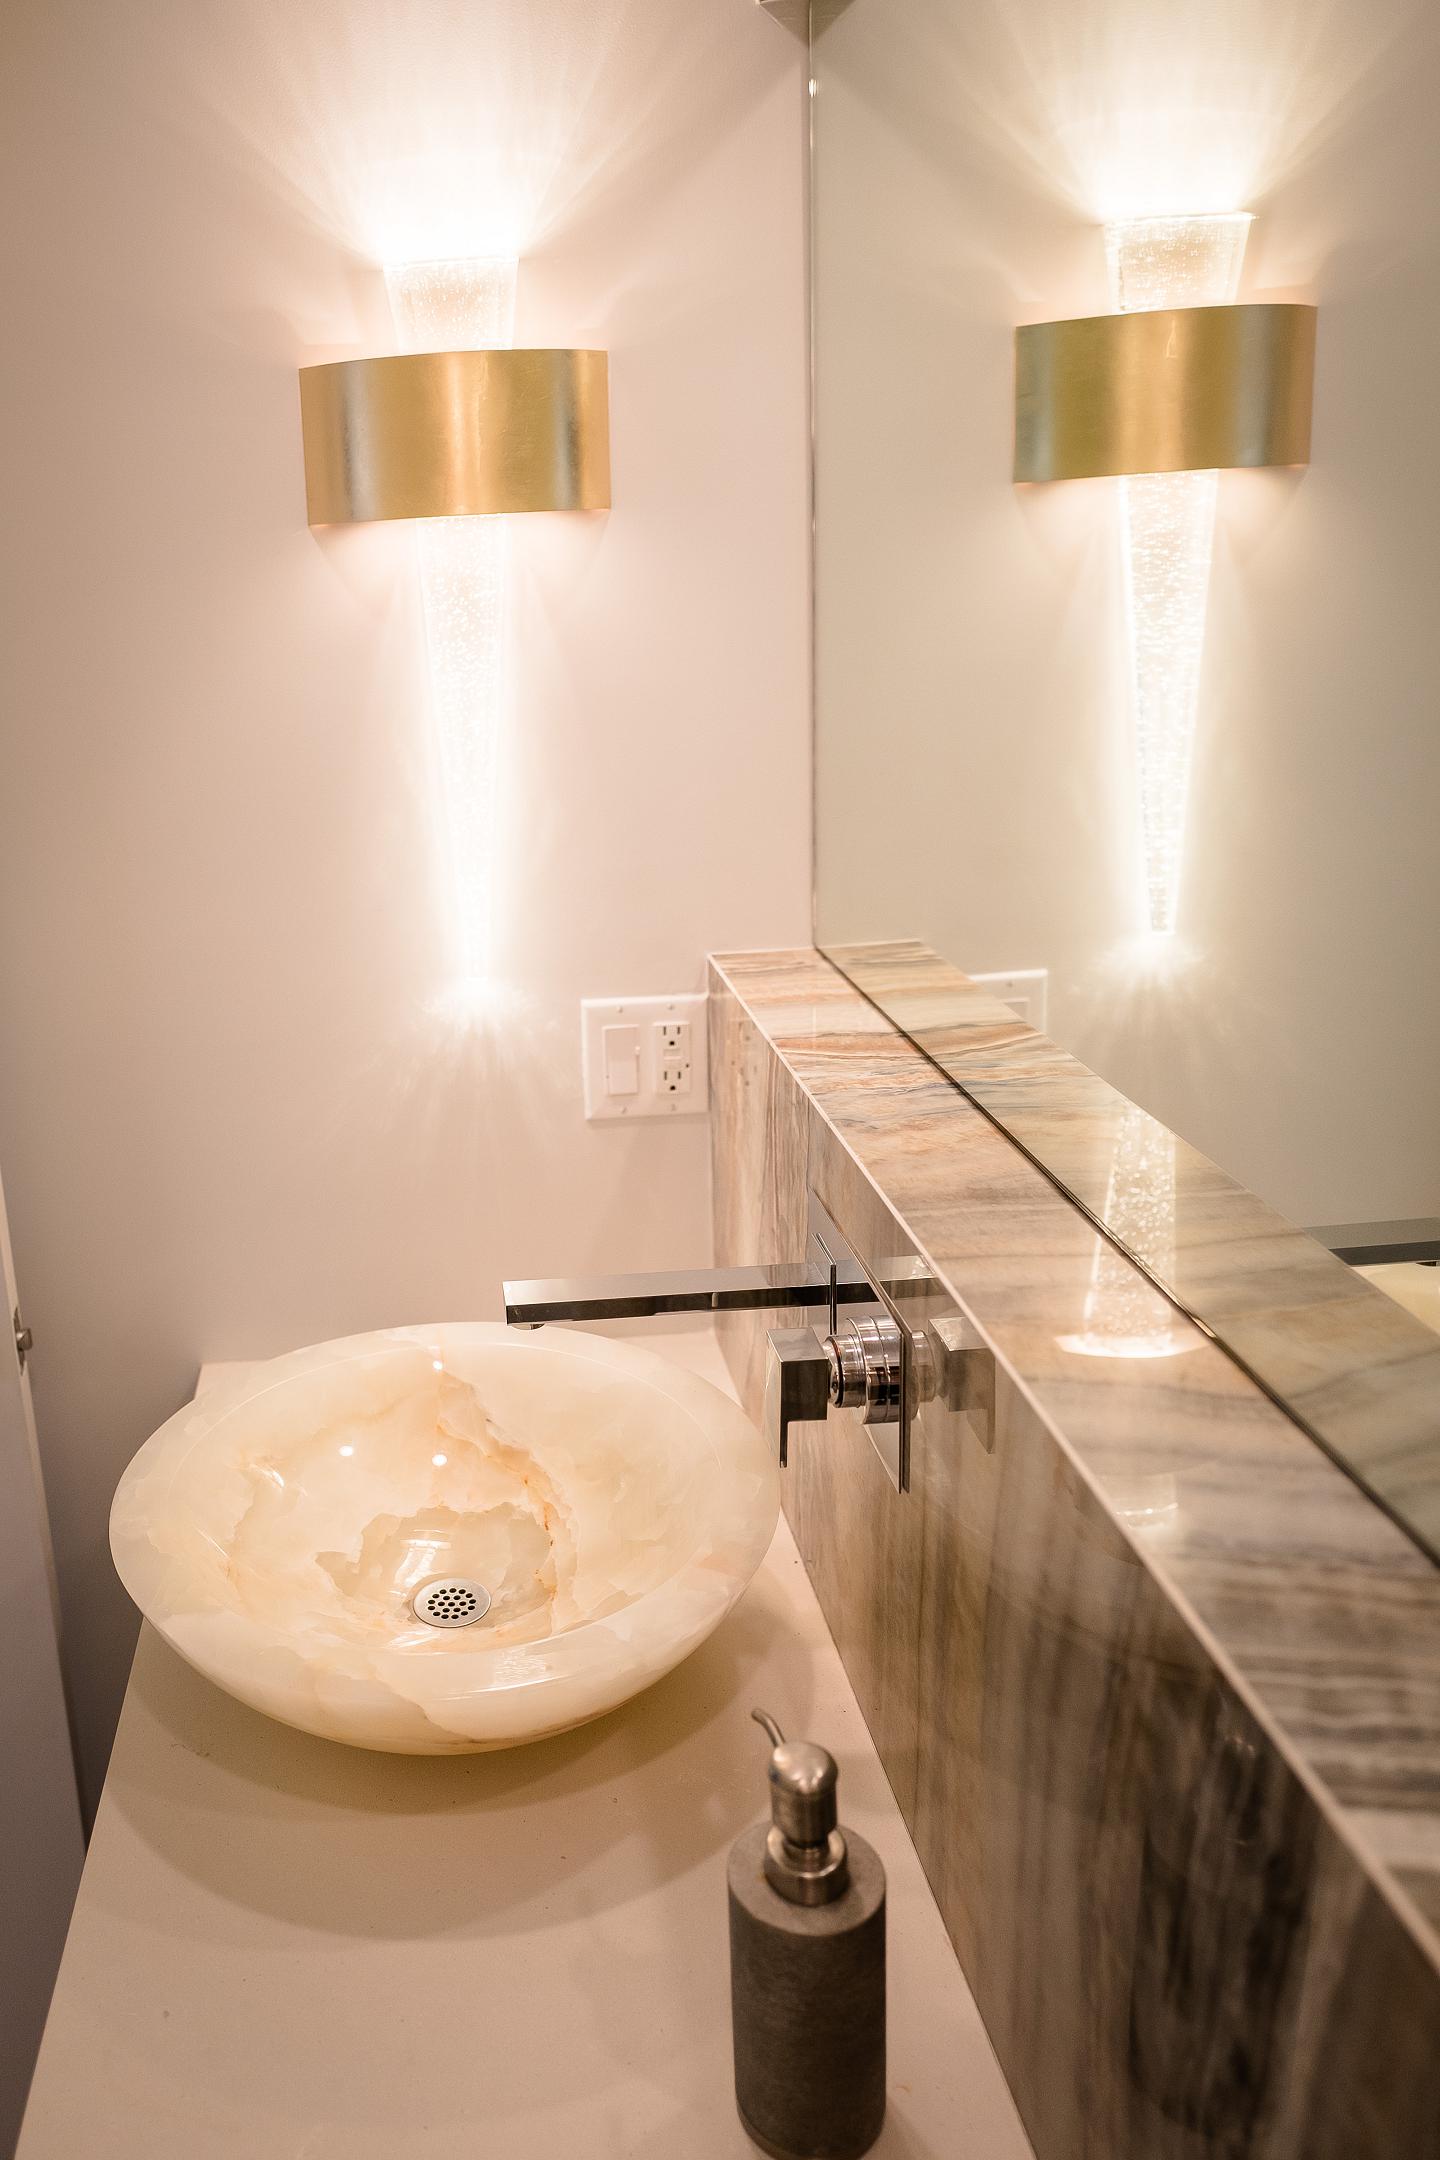 Modern bathroom sink with wall-mounted faucets and lights.